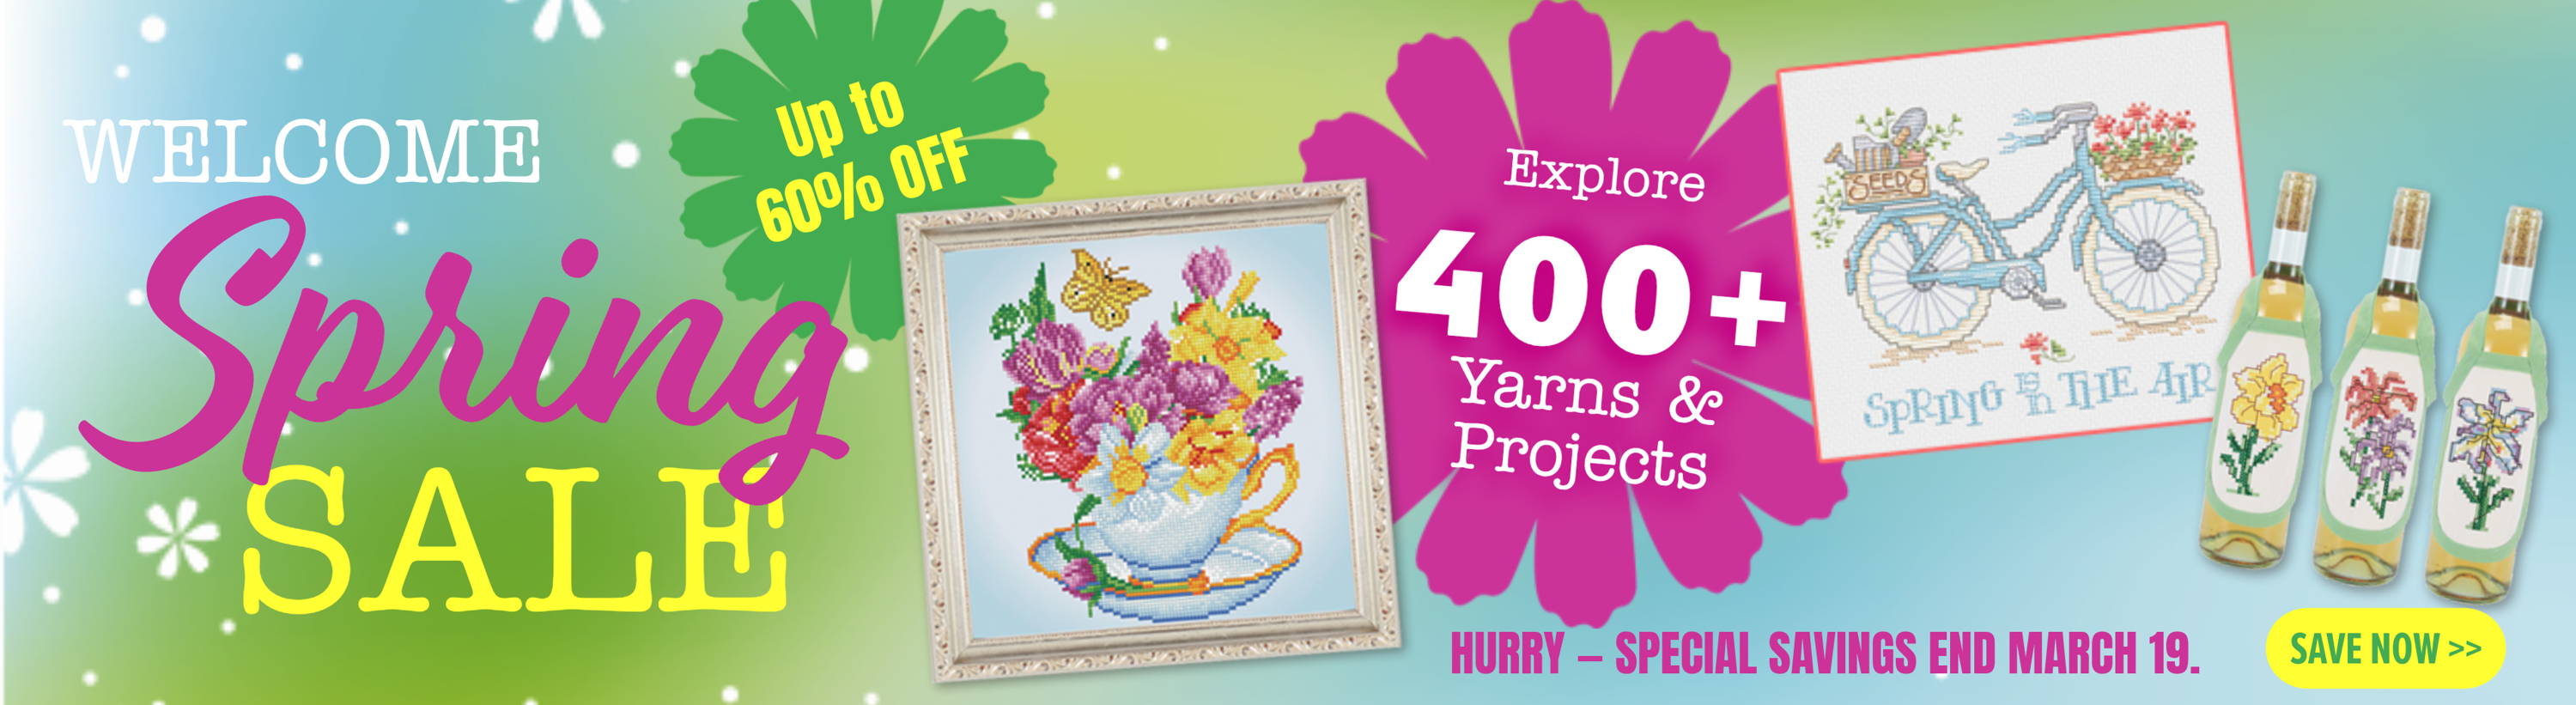 Welcome Spring Sale: Up to 60% Off. Explore 400+ Yarns & Projects. Hurry — Special Savings End March 19. Save Now.